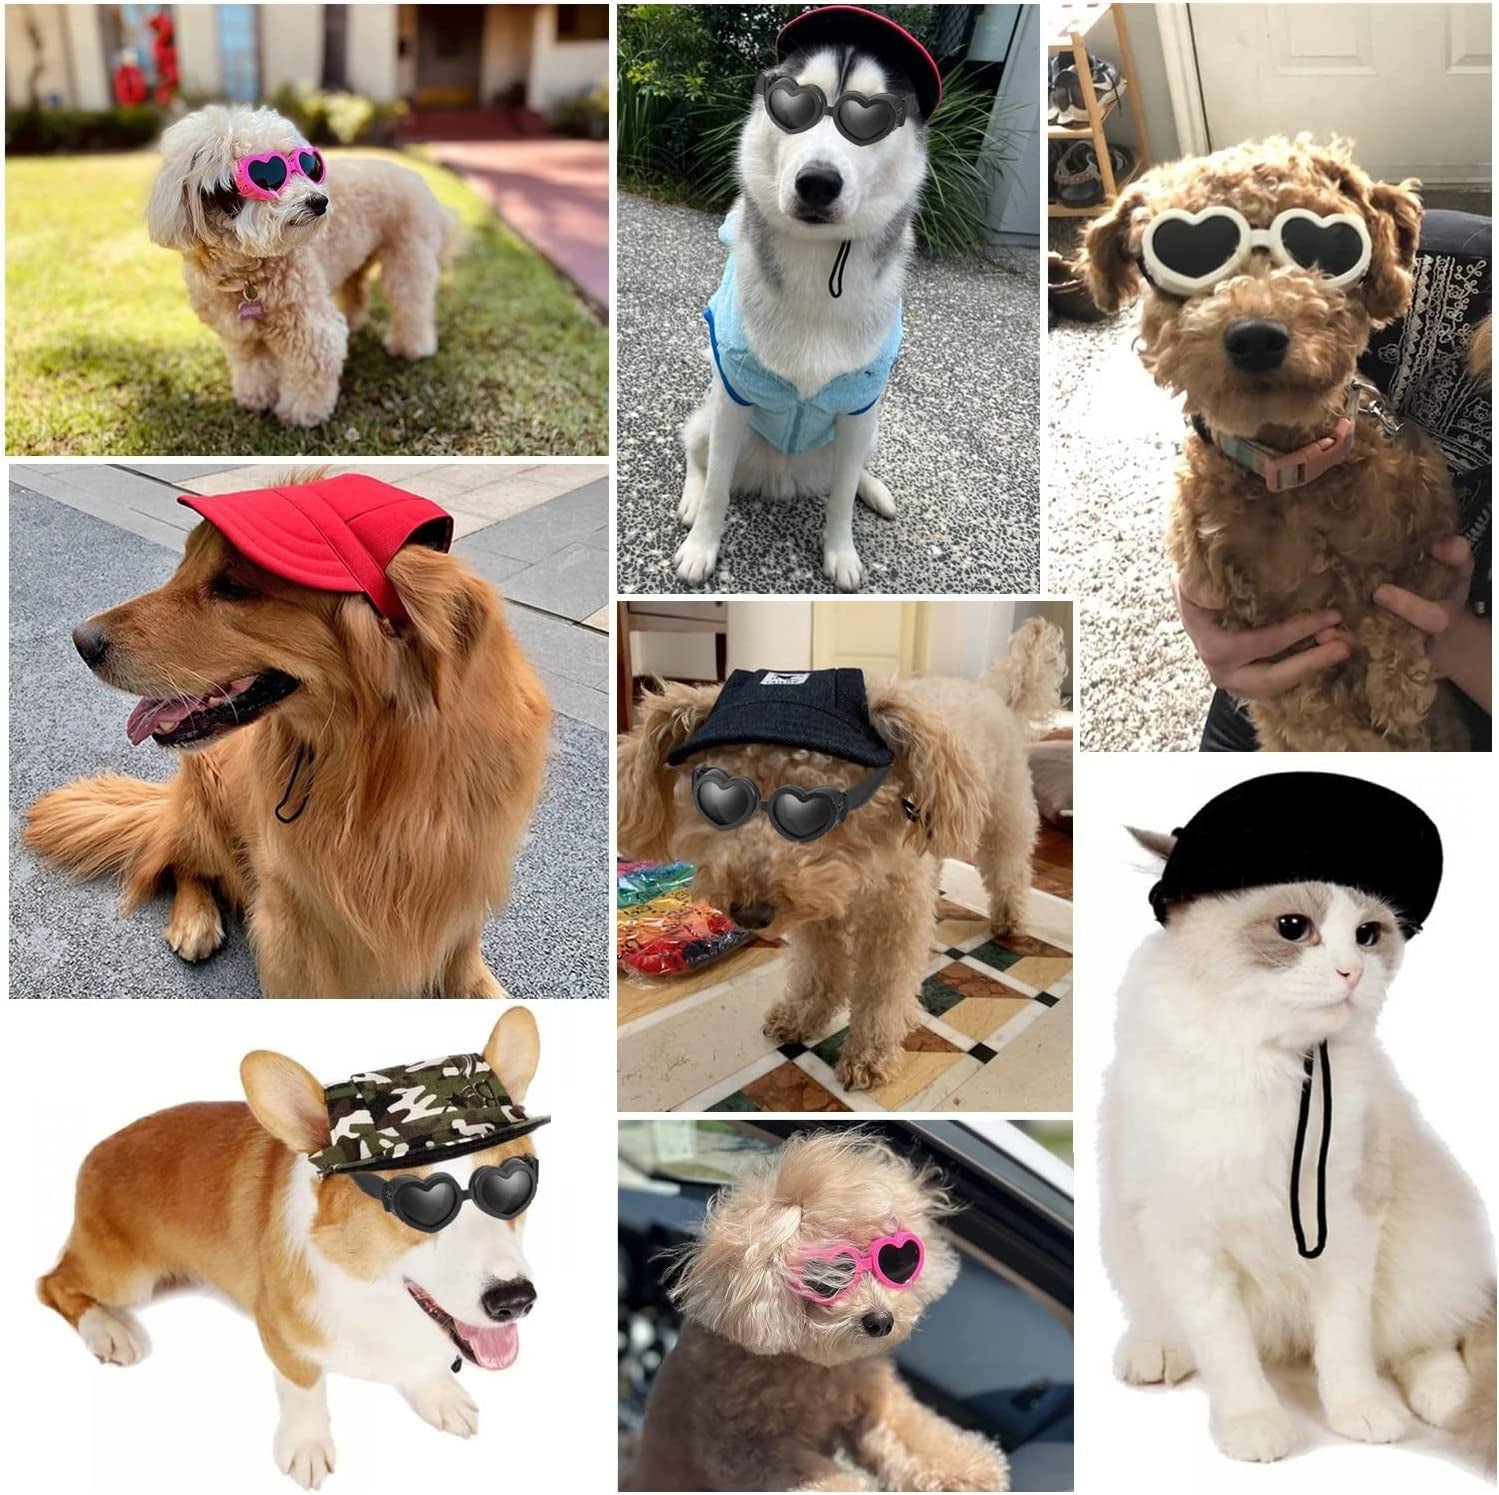 Dog Hat Sun Hat Baseball Cap Trucker Hat Dog Hats for Small Dogs with Ear  Holes Adjustable Drawstring Breathable Waterproof Design UV Protection